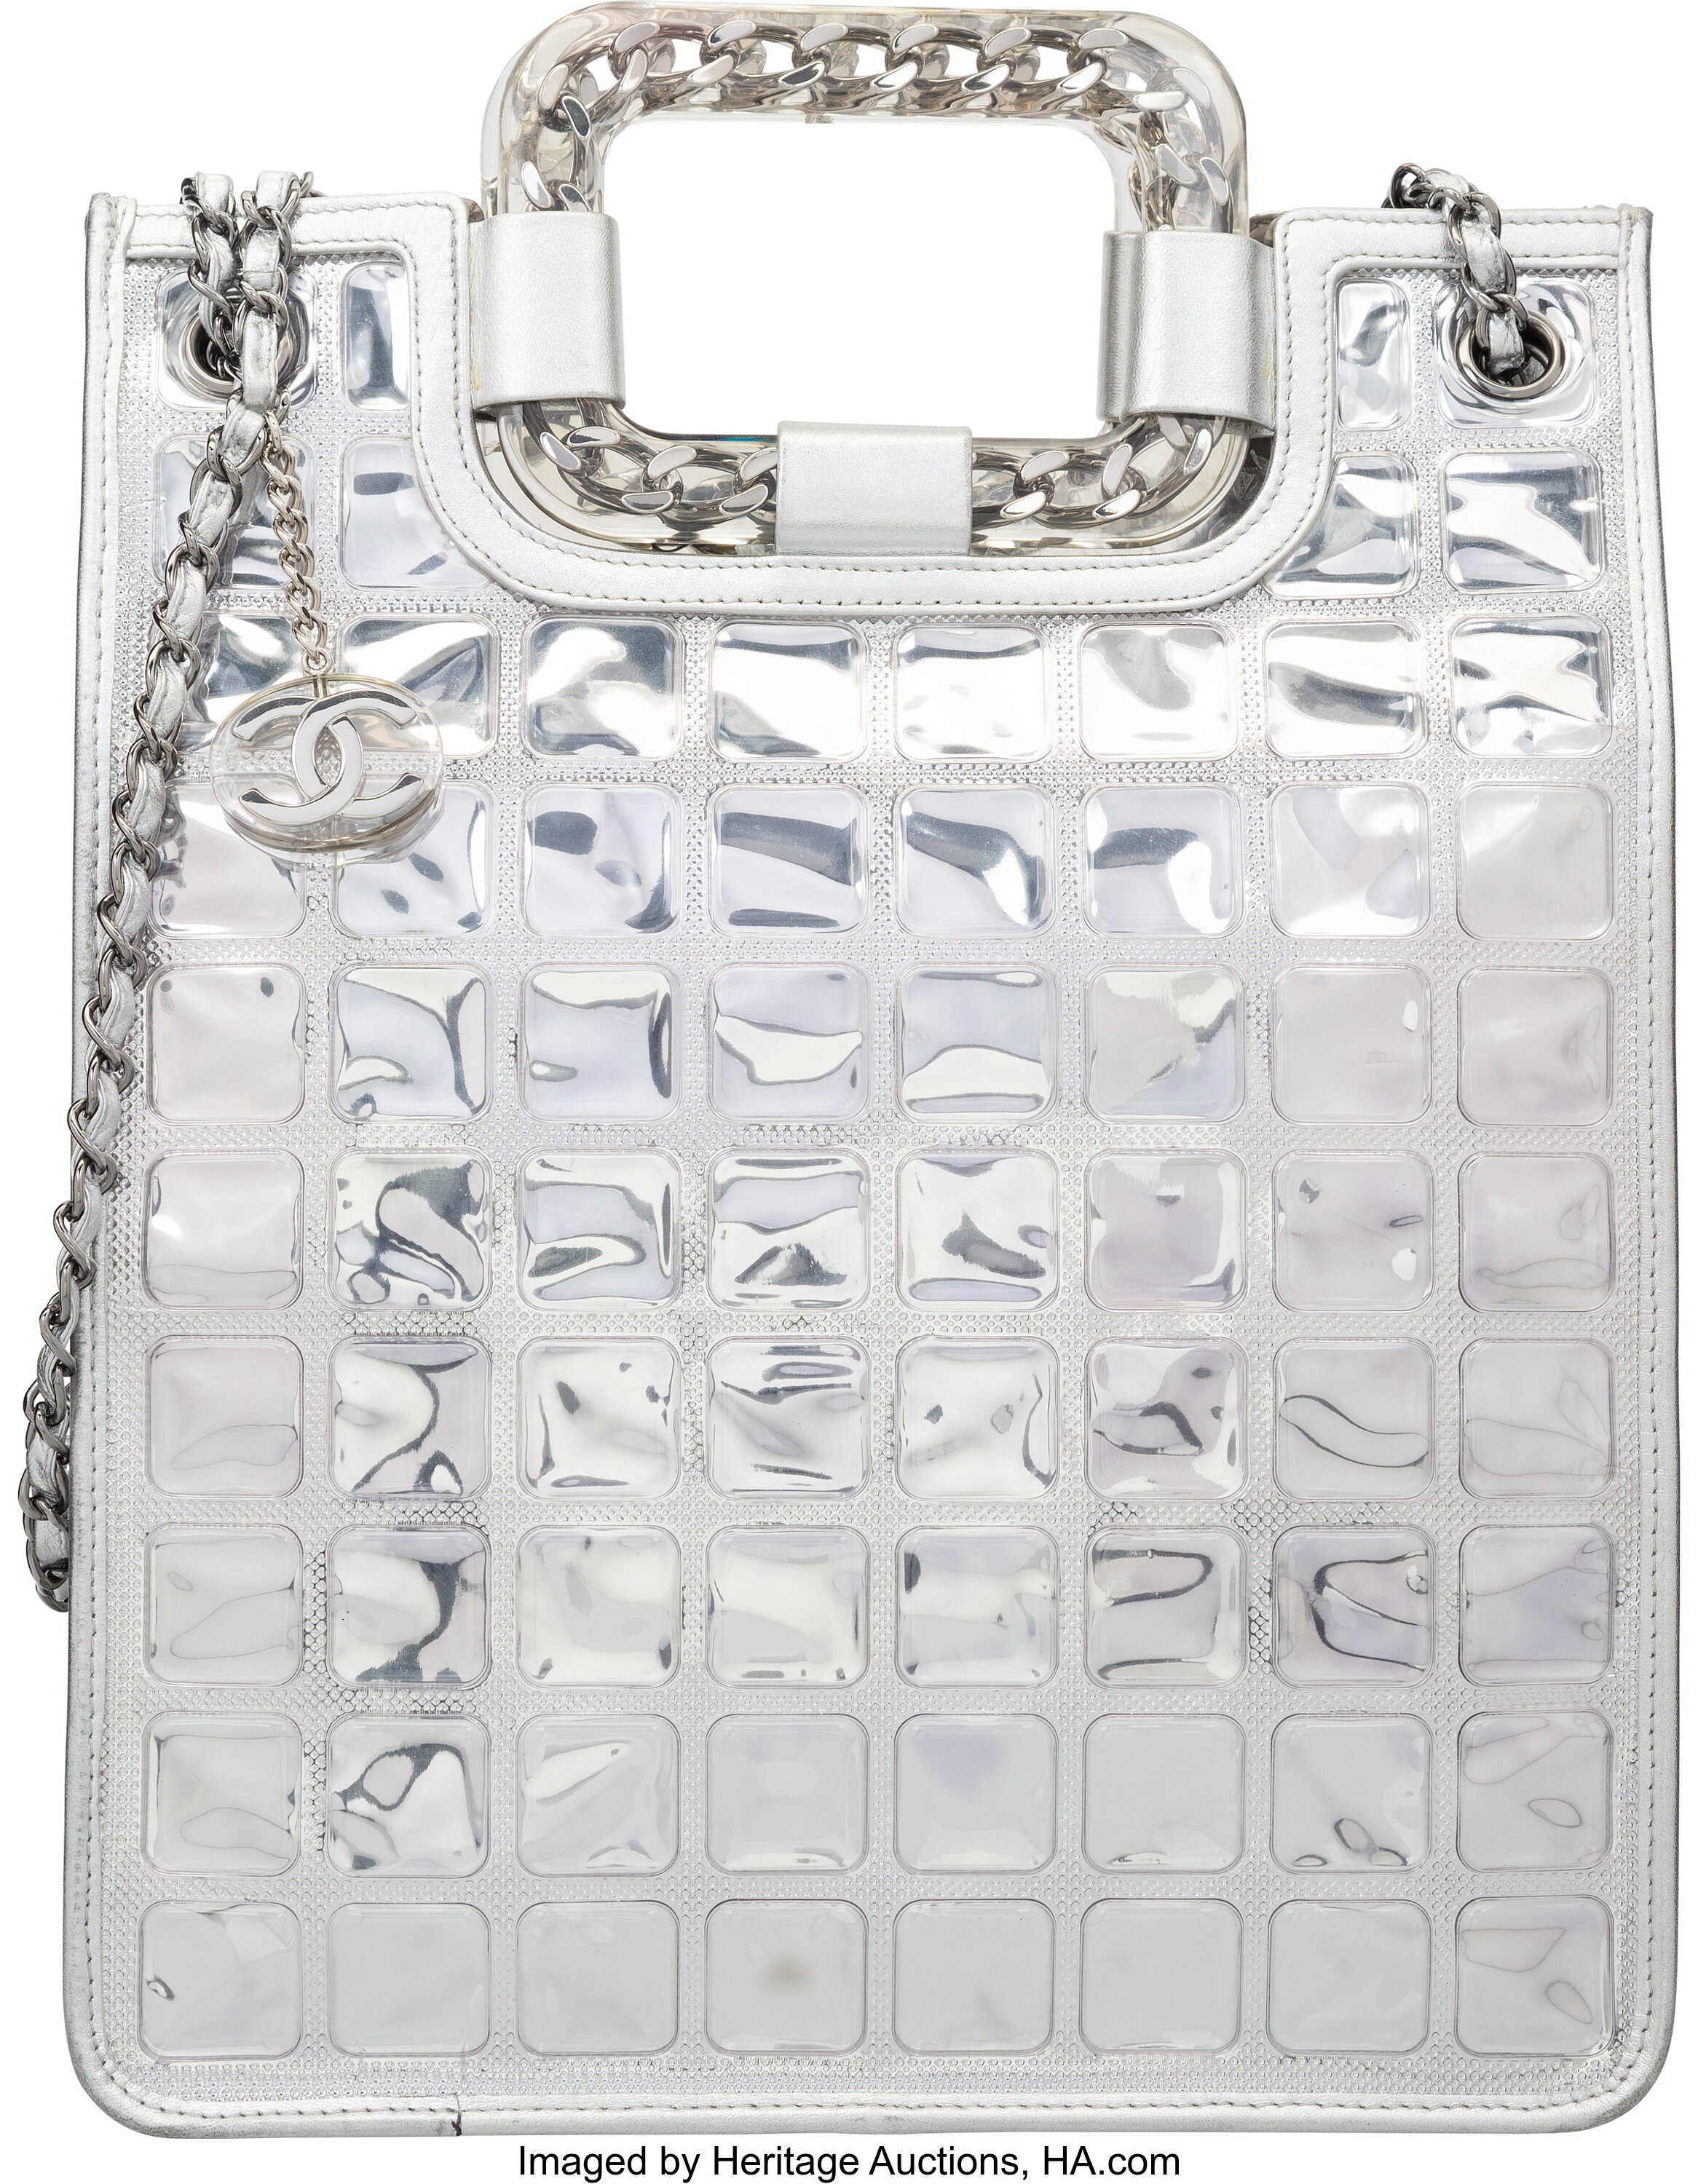 Chanel Metallic Silver Leather & PVC Ice Cube Tote Bag. Very Good | Lot  #58429 | Heritage Auctions